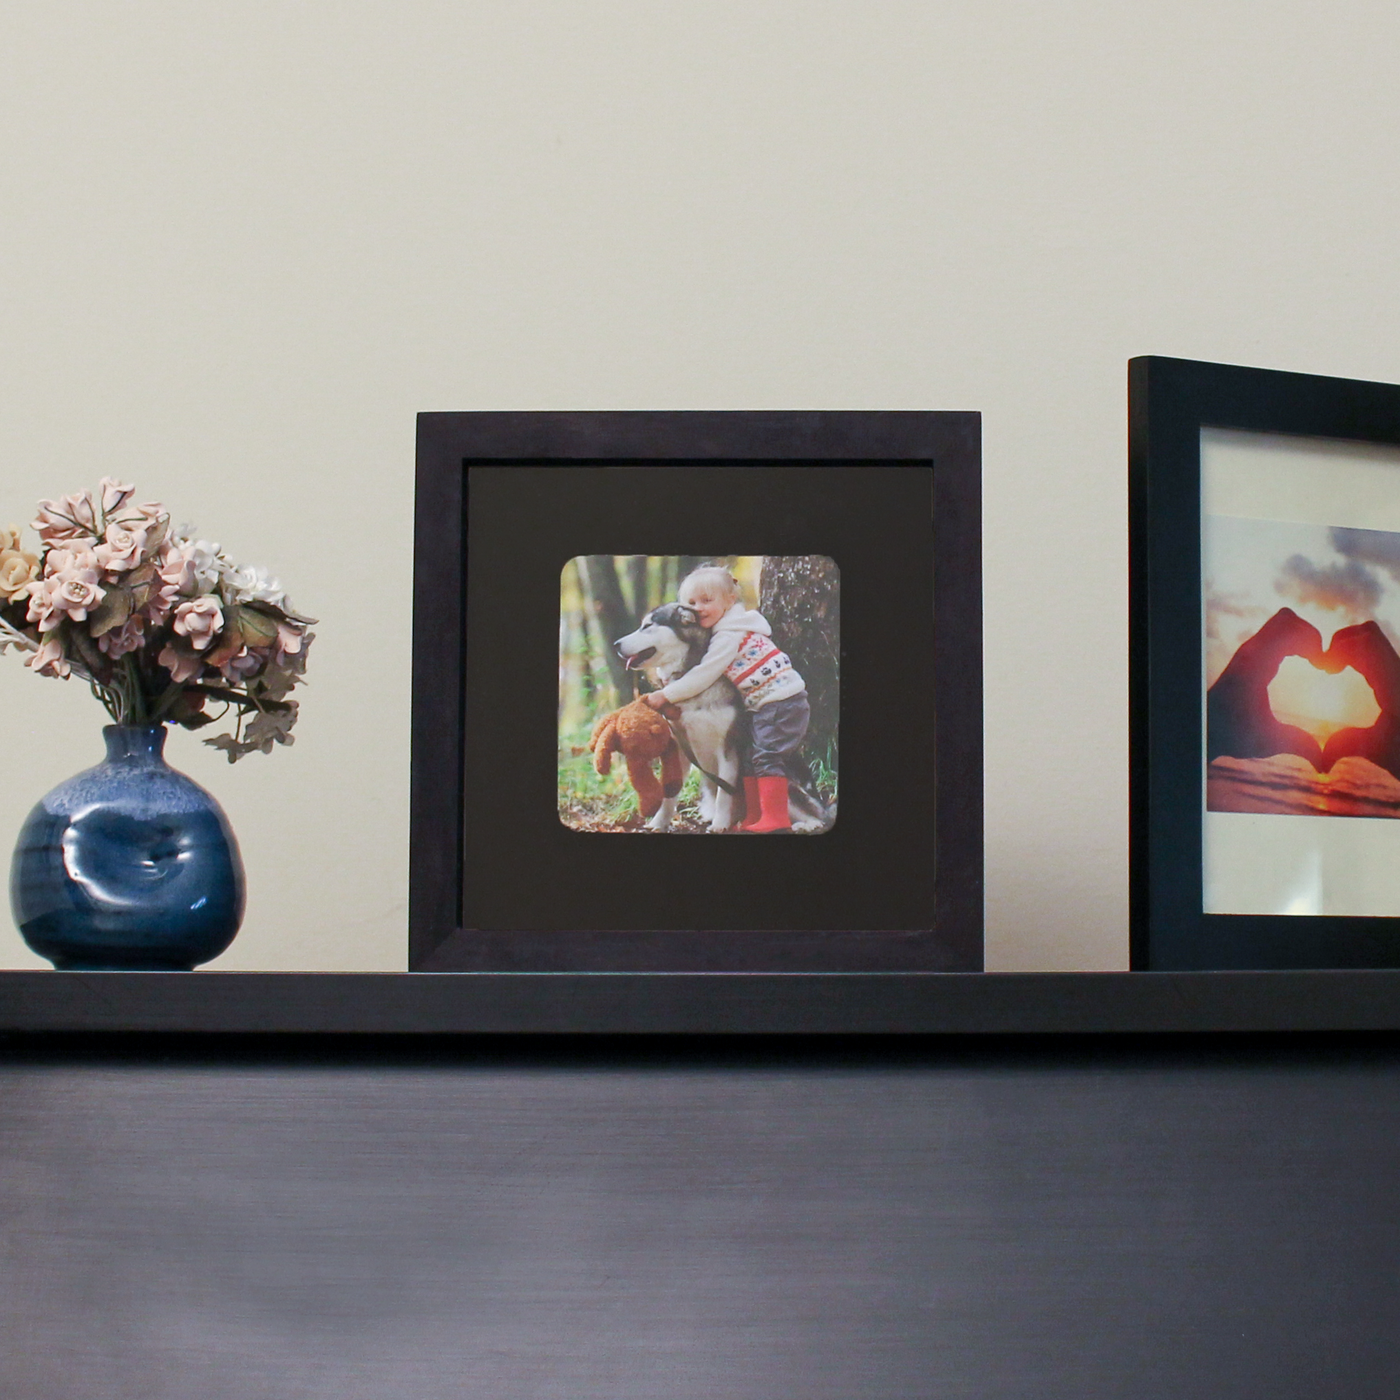 An arrangement of home decor items: A blue vase with pink flowers with green stems, a black picture frame along with a picture of a young firl and a dog, and a portion of another picture that shows hands in the shape of a heart. 